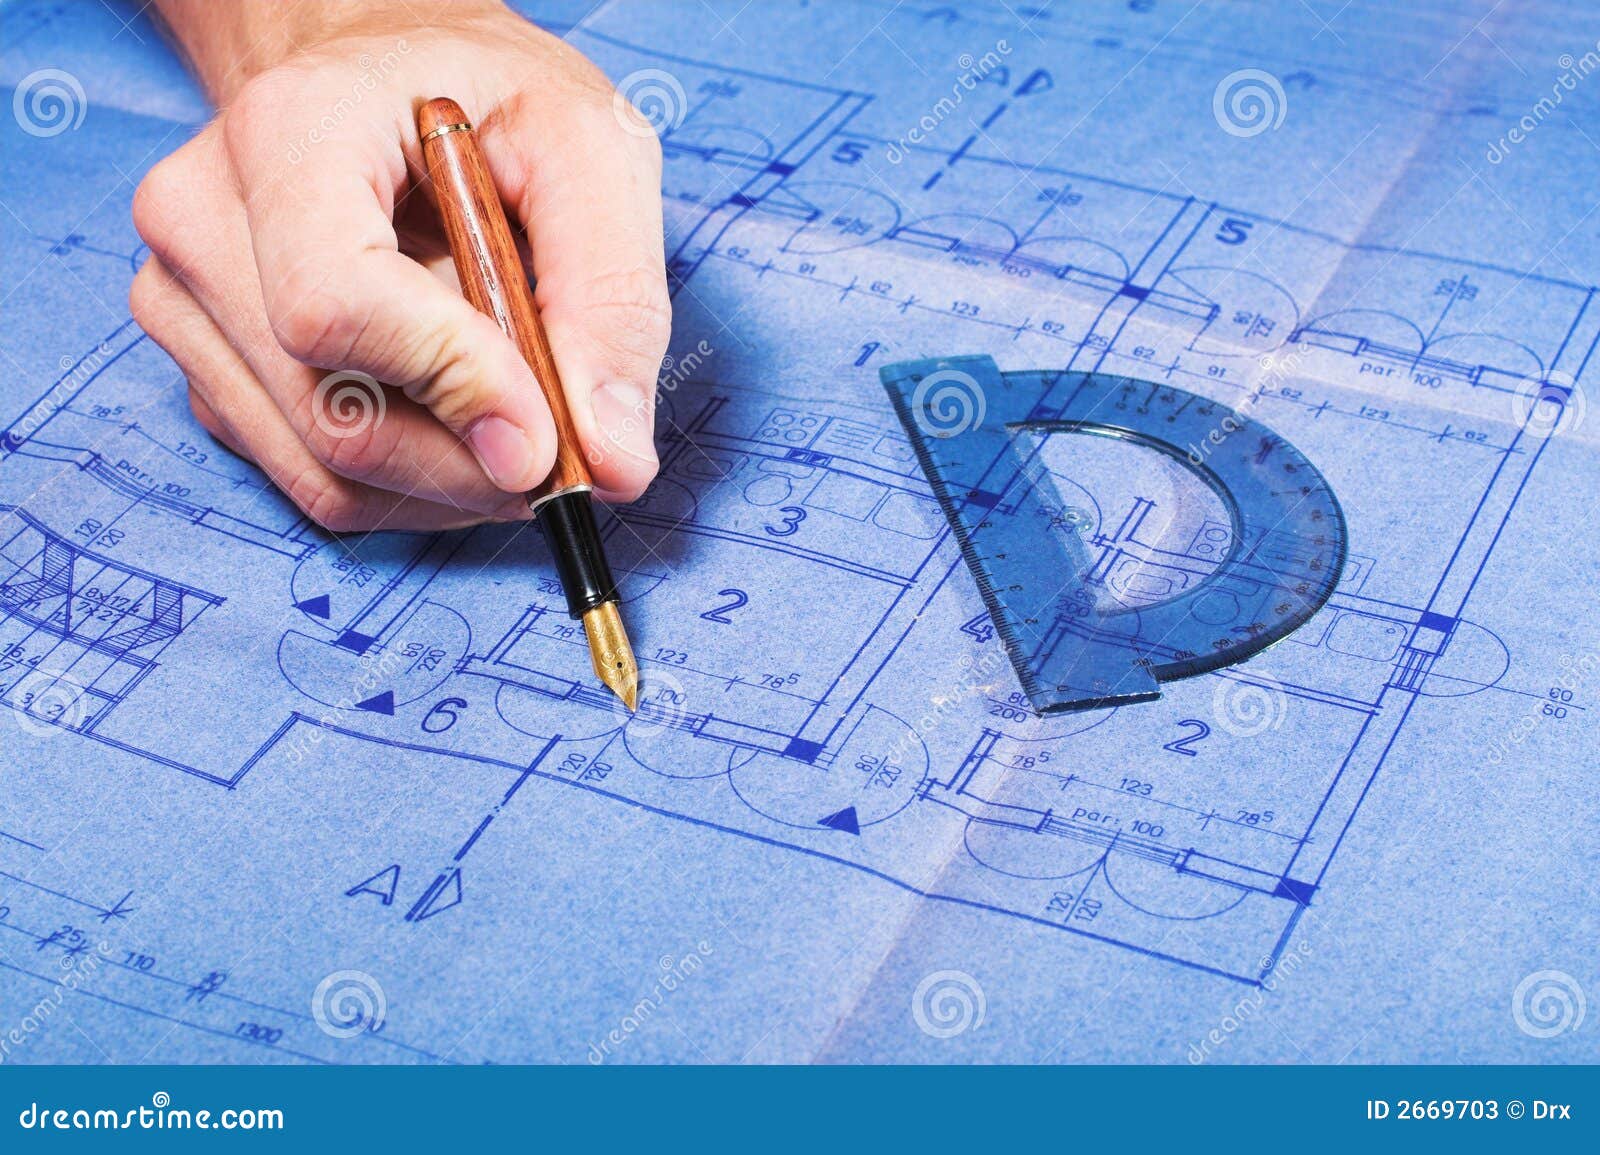 How To Draw A Blue Print 78